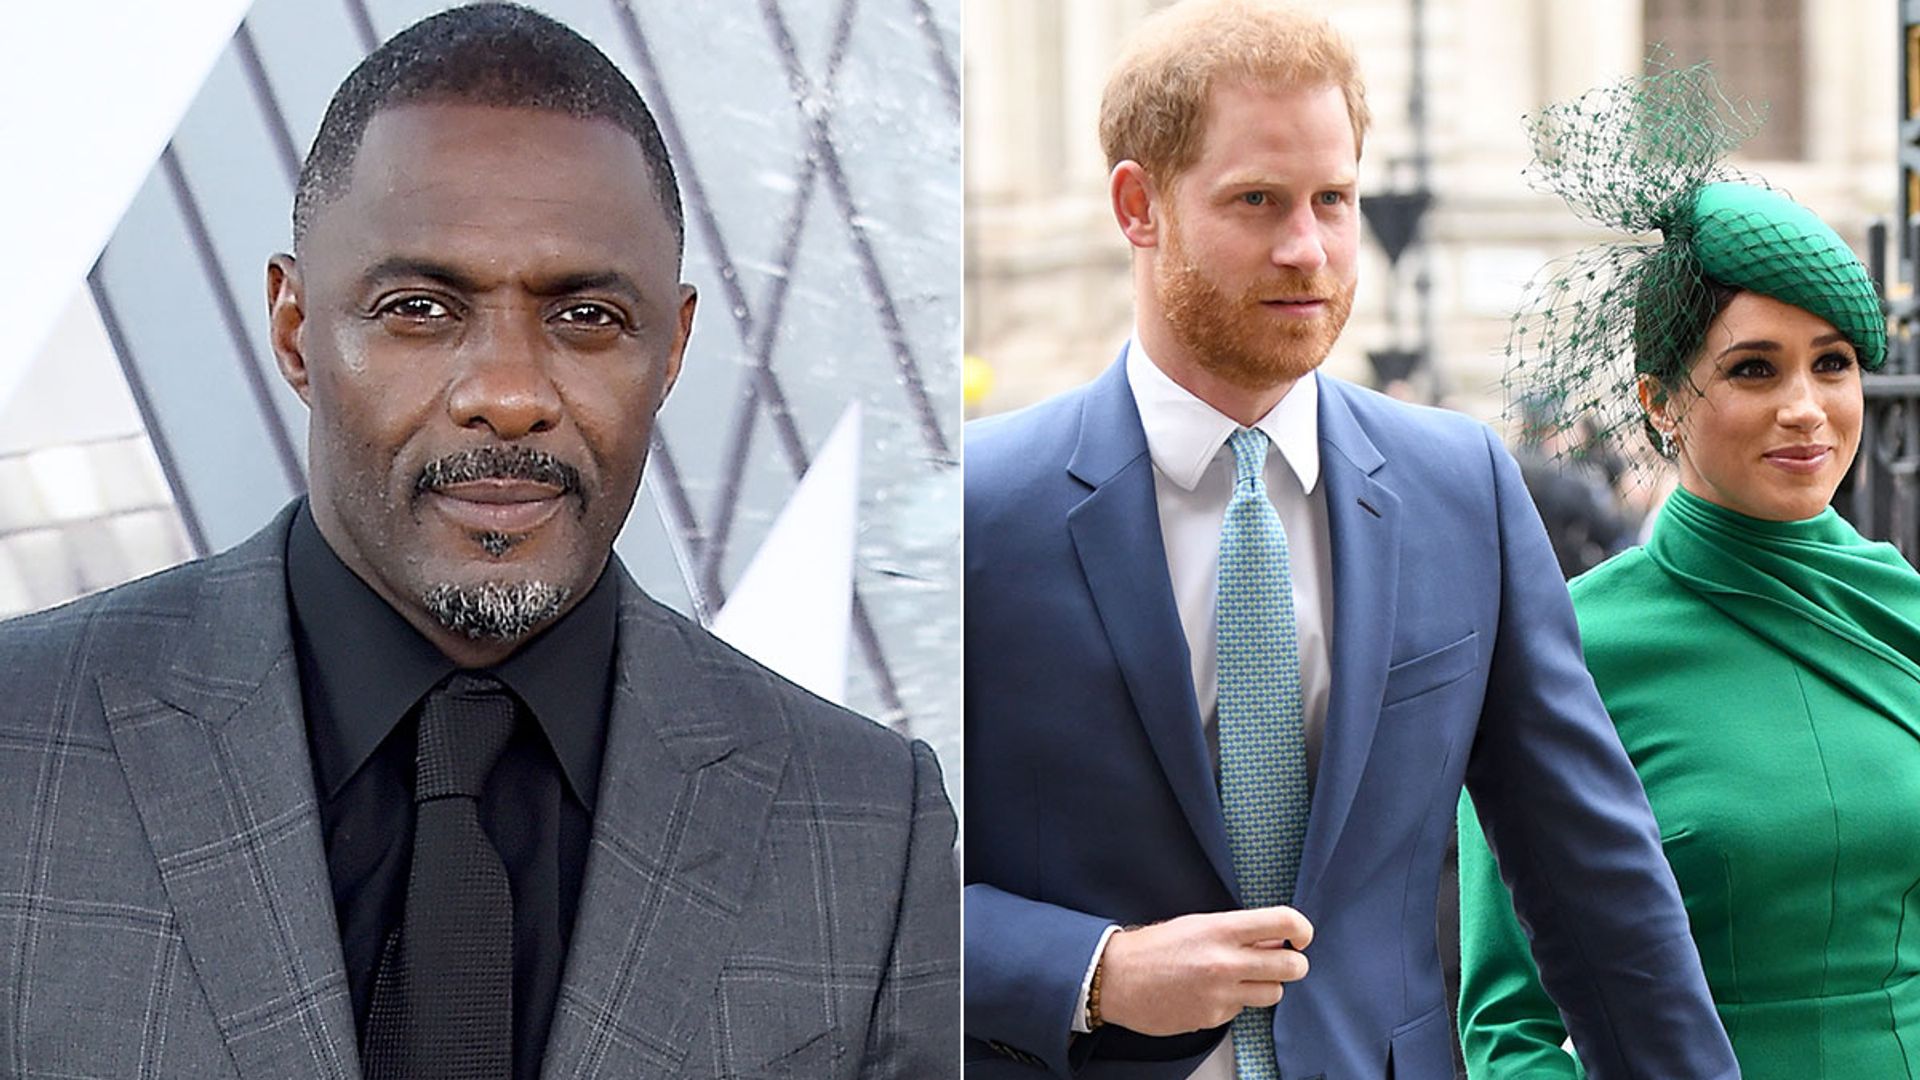 Idris Elba defends Prince Harry and Meghan Markle's divisive Oprah interview